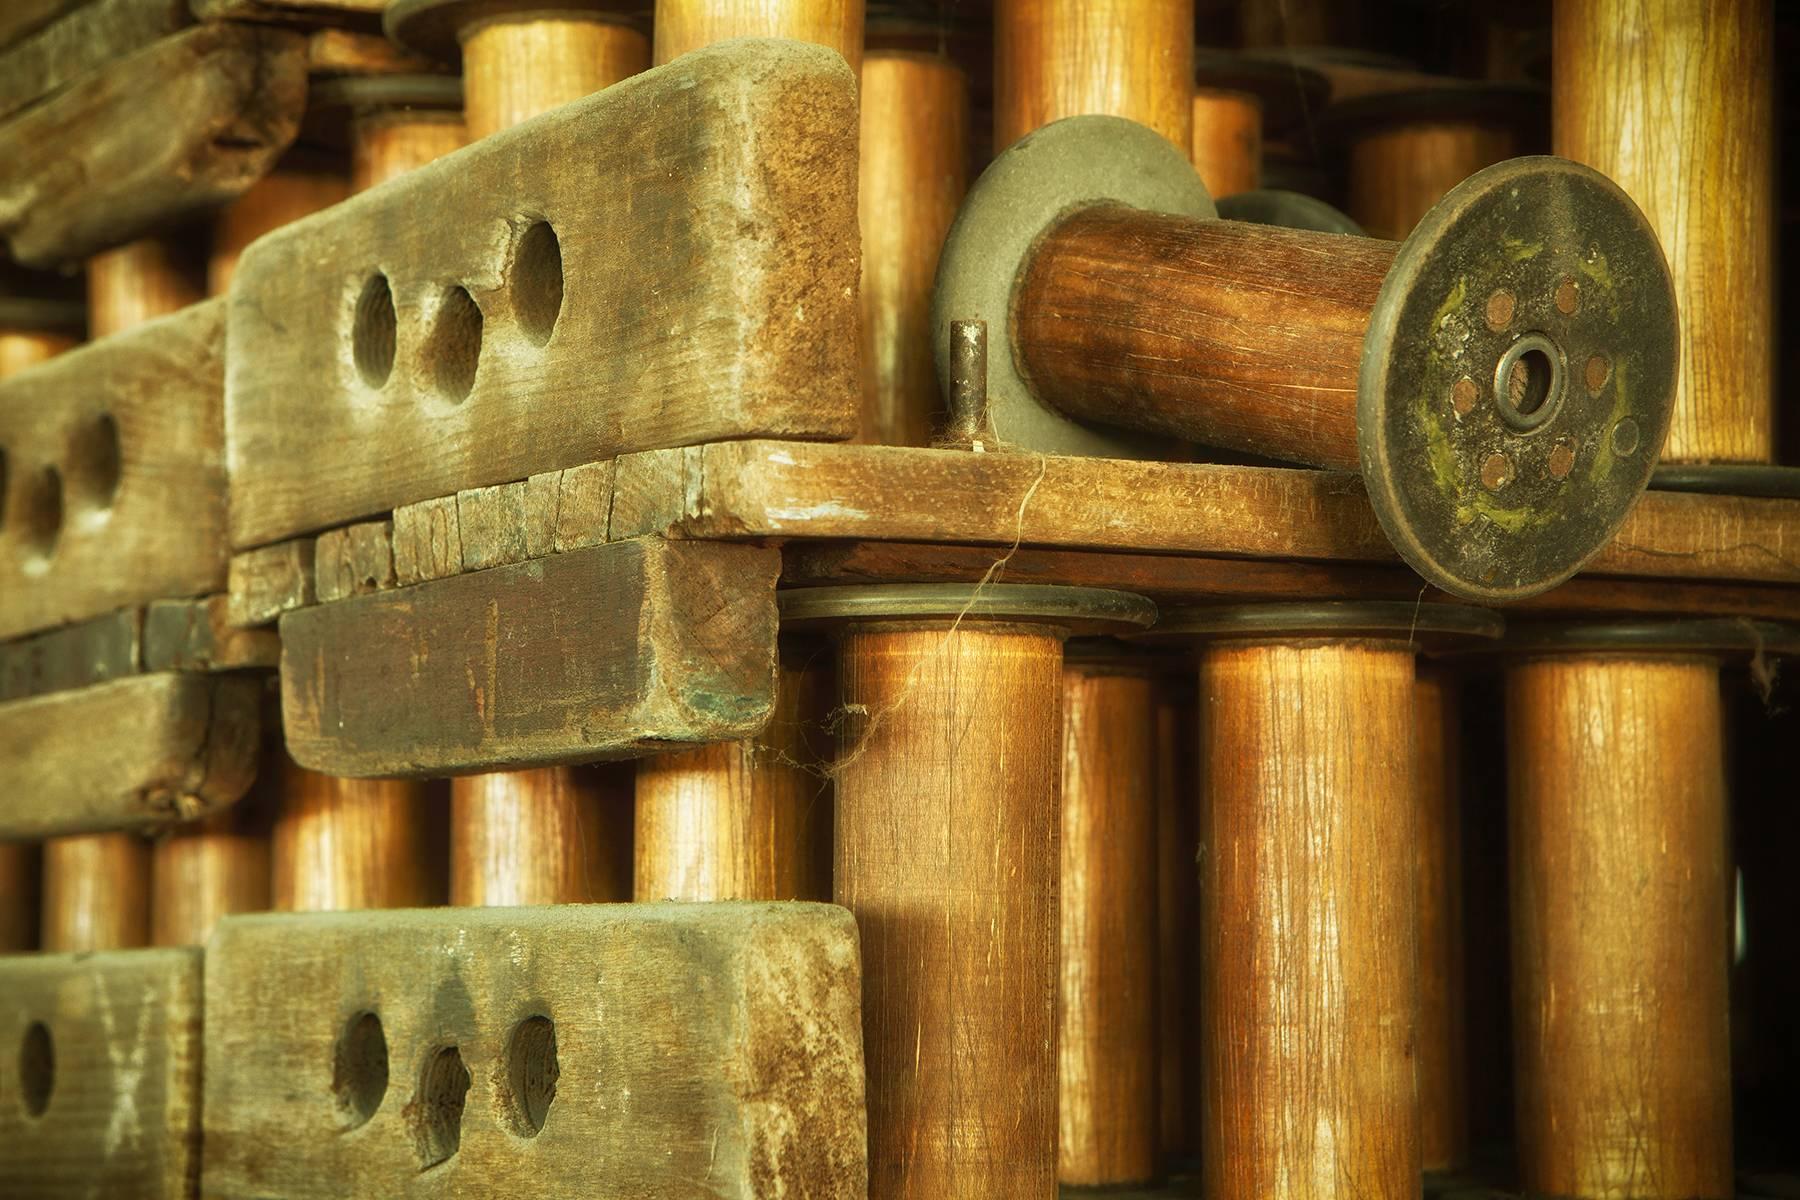 Rebecca Skinner Still-Life Photograph - "Spools", color photograph, abandoned silk mill, industrial, vintage, brown